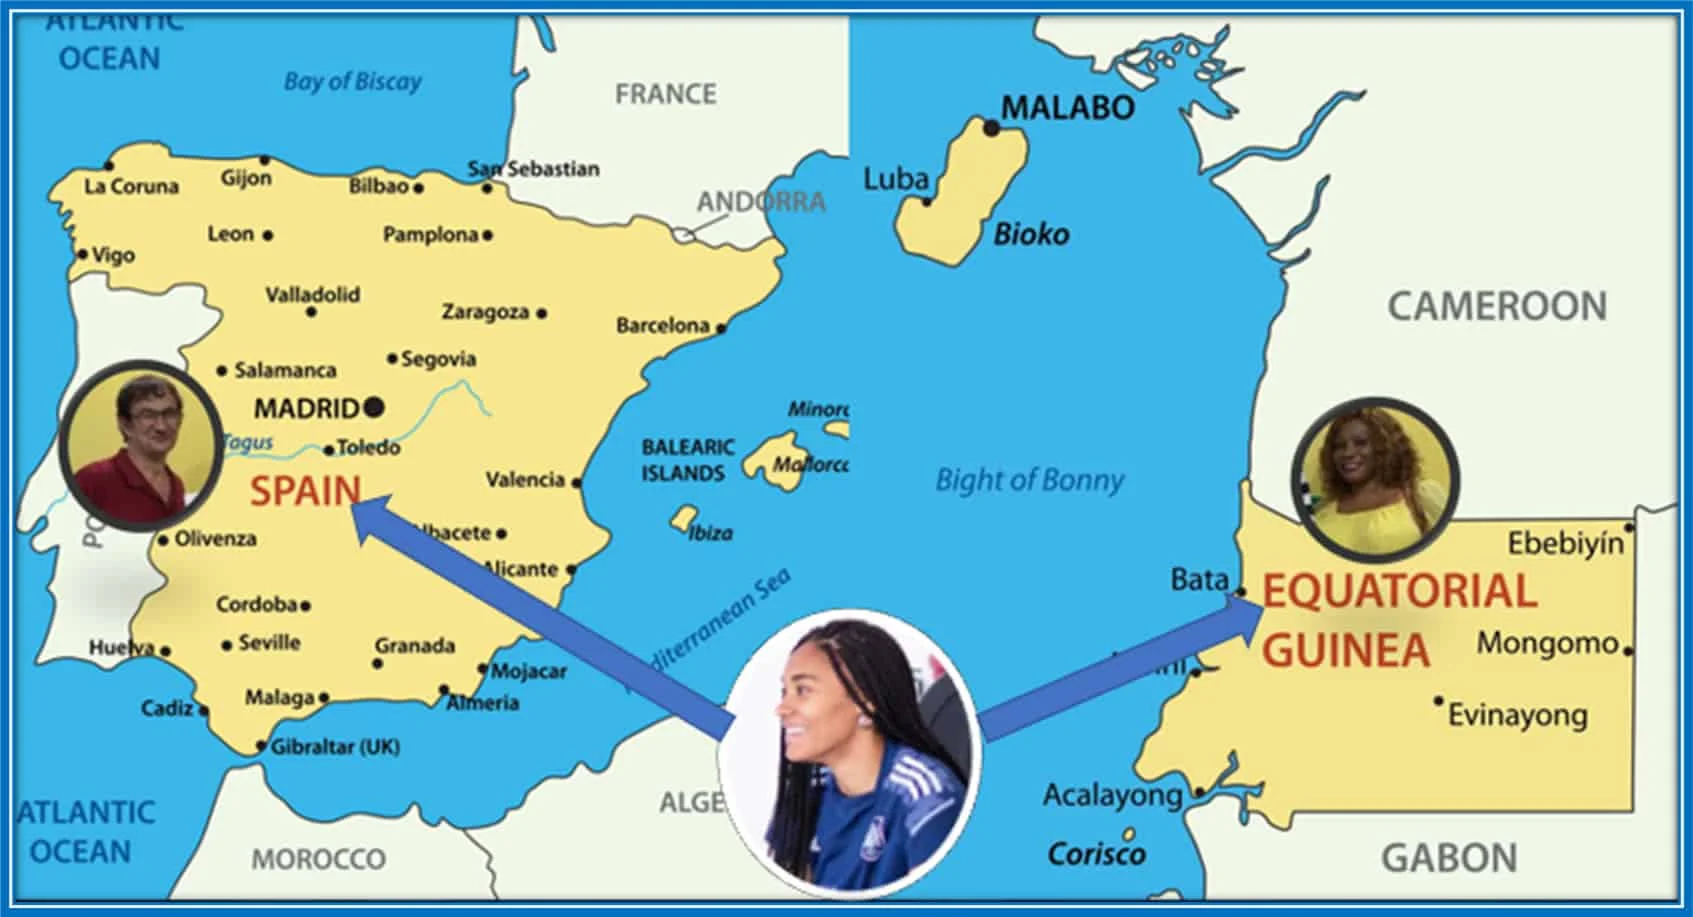 The Map helps you understand Salma Paralluelo’s nationality and family origin better. Image credit: SpainMap, CO, USA and Mappr